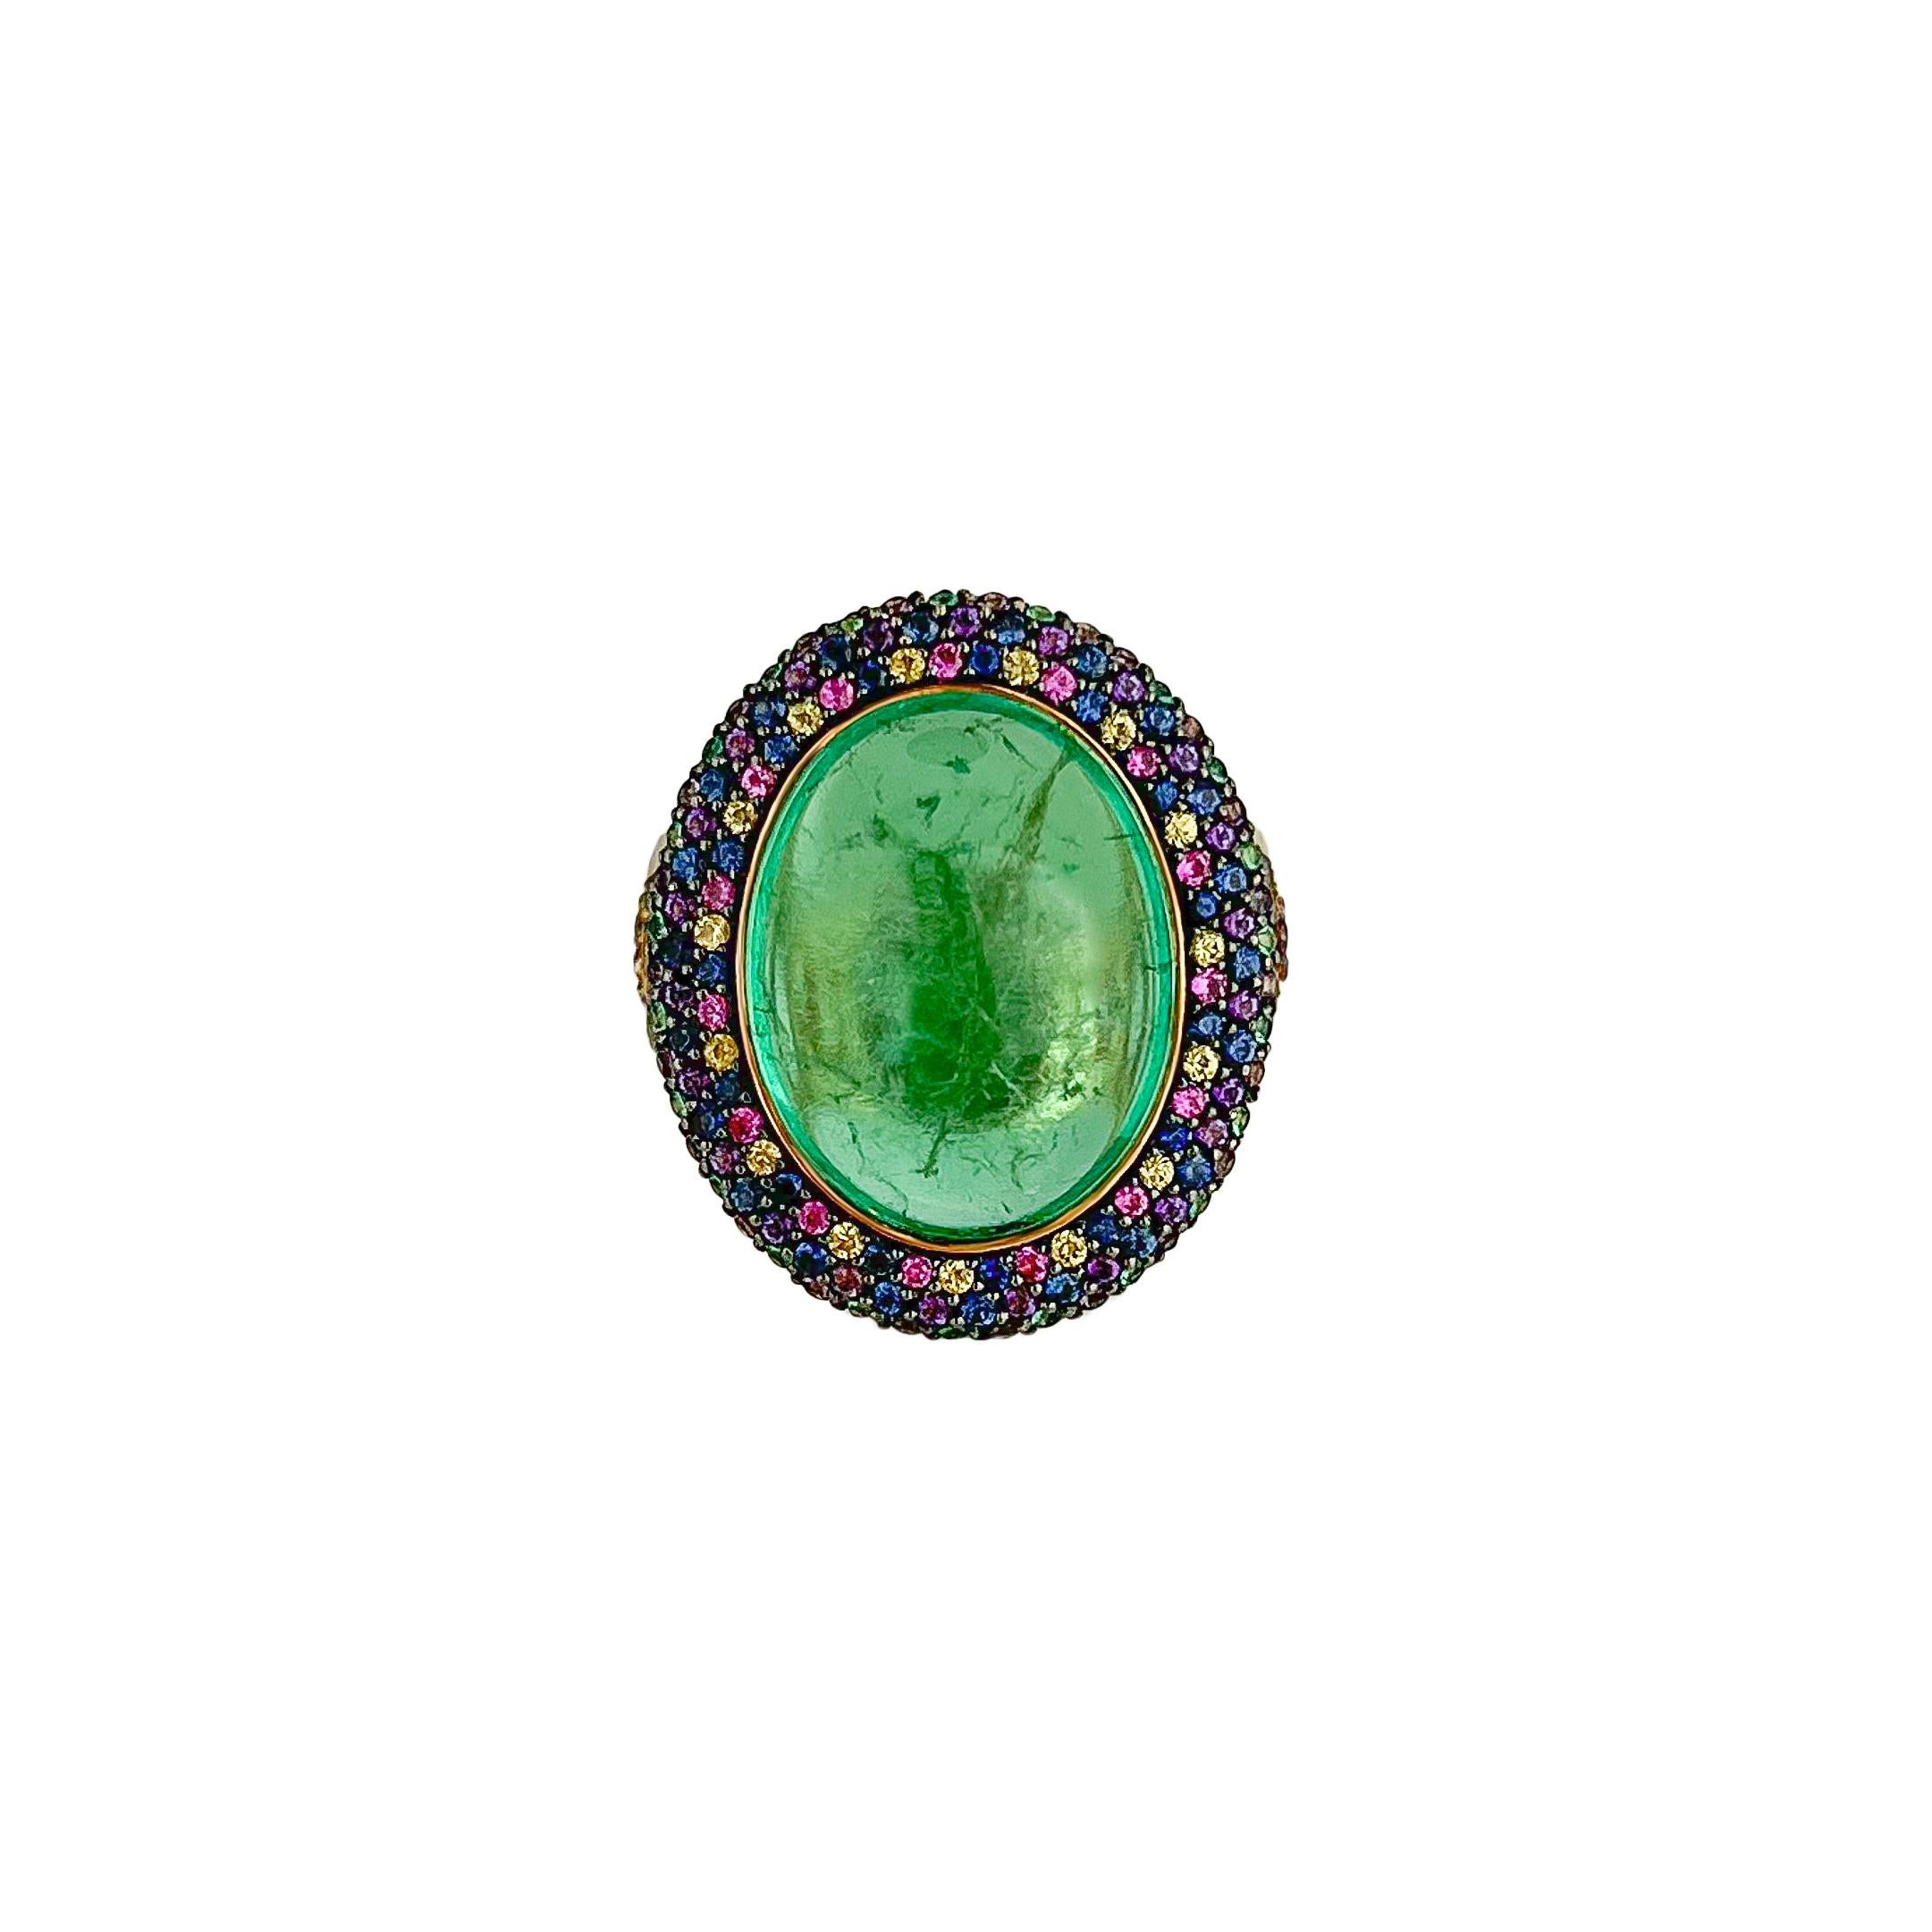 A classic shaped Emerald Cabochon was recreated into a modern piece with this 18k yellow gold ring. The 12.62 centre stone is decorated with a halo of pave’d Emeralds, Pink, Purple and Violet Sapphires. A chevron pattern of pave’d stones also